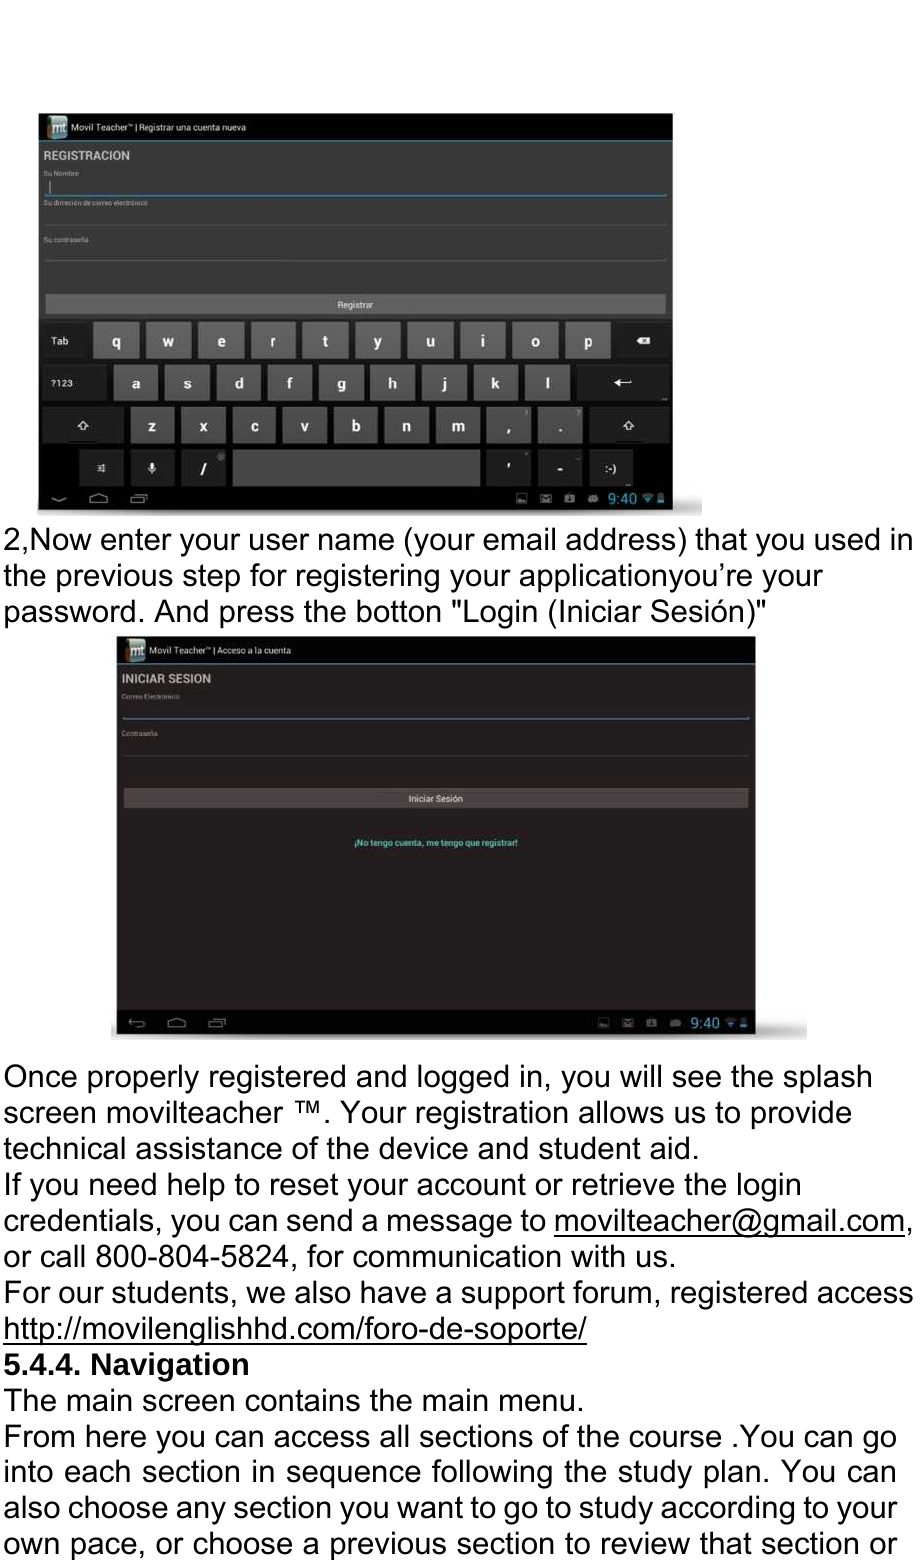    2,Now enter your user name (your email address) that you used in the previous step for registering your applicationyou’re your       password. And press the botton &quot;Login (Iniciar Sesión)&quot;  Once properly registered and logged in, you will see the splash screen movilteacher ™. Your registration allows us to provide technical assistance of the device and student aid. If you need help to reset your account or retrieve the login credentials, you can send a message to movilteacher@gmail.com, or call 800-804-5824, for communication with us. For our students, we also have a support forum, registered access http://movilenglishhd.com/foro-de-soporte/ 5.4.4. Navigation The main screen contains the main menu. From here you can access all sections of the course .You can go into each section in sequence following the study plan. You can also choose any section you want to go to study according to your own pace, or choose a previous section to review that section or 